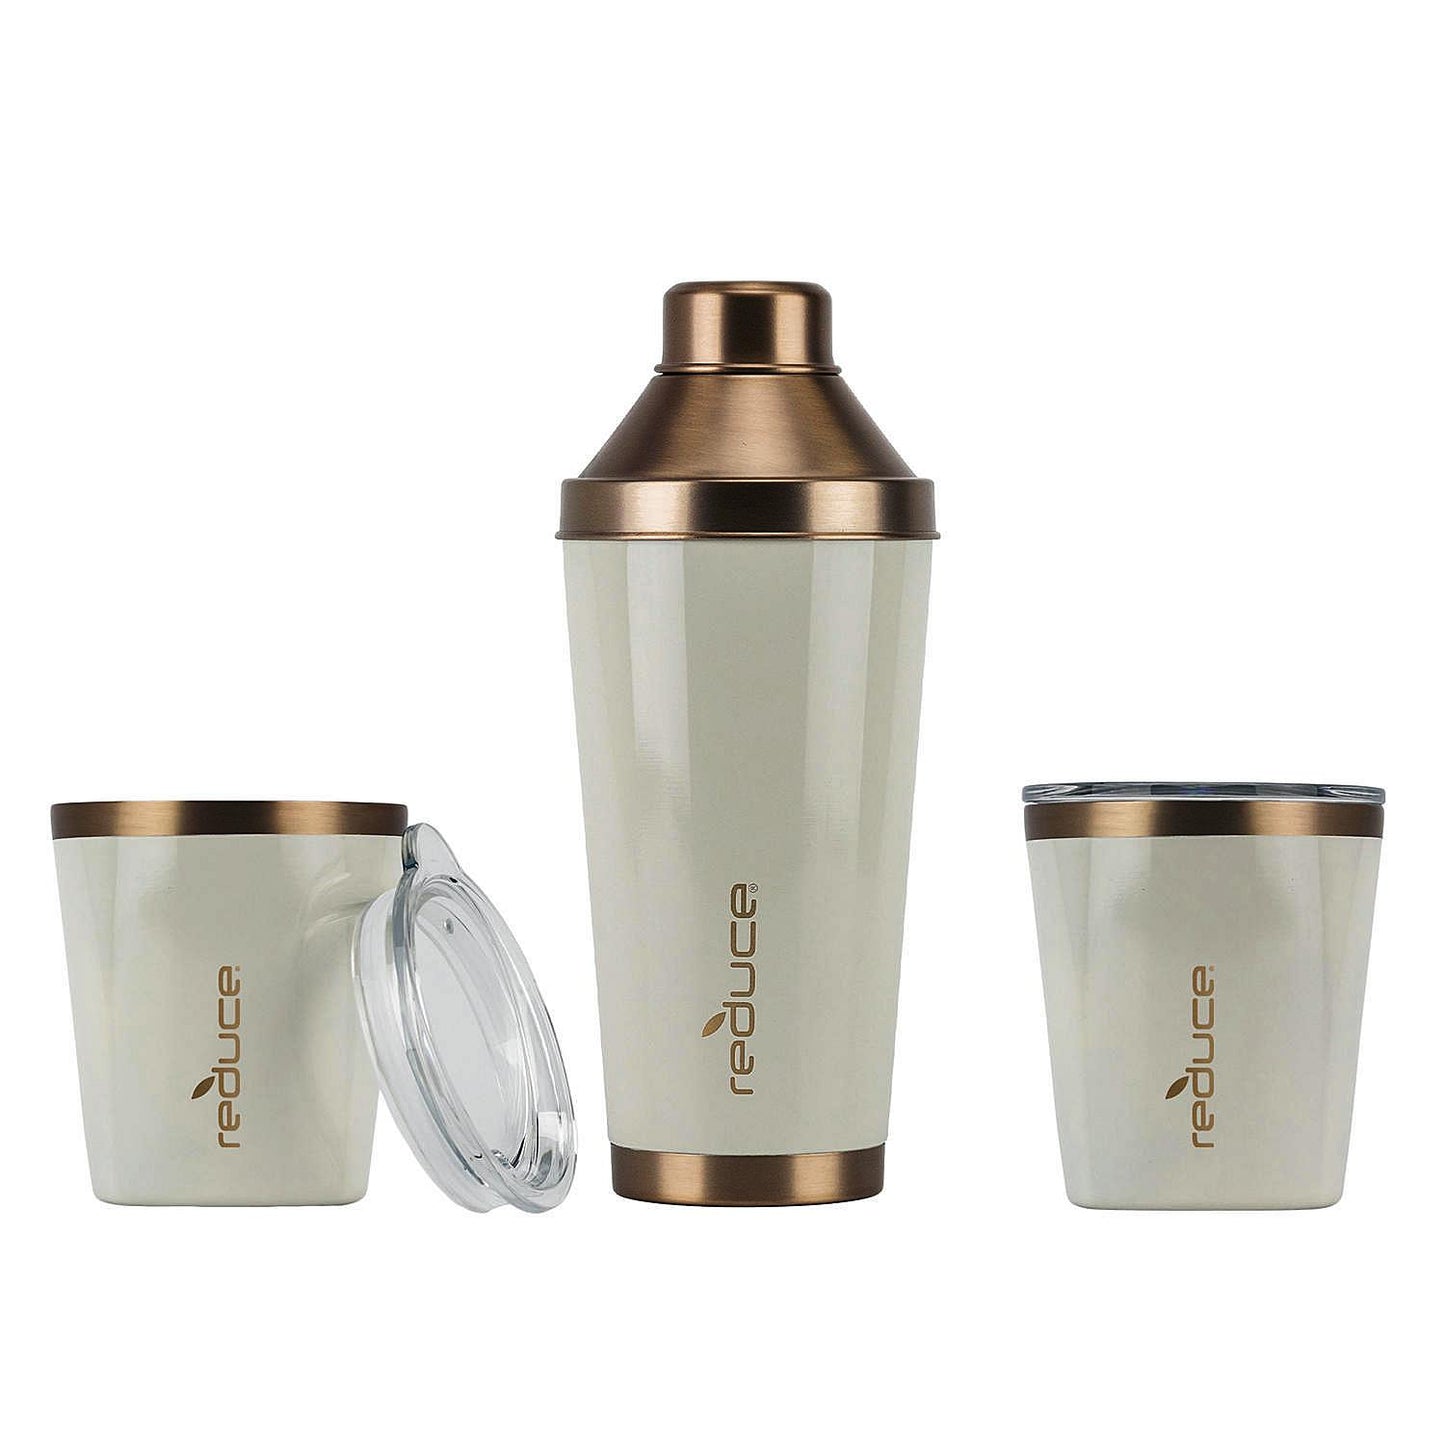 Wholesale Lot of Reduce 3 Pc Cocktail Shaker with Two 10-oz. Lowball Tumblers with Lids Stainless Steel Brand New